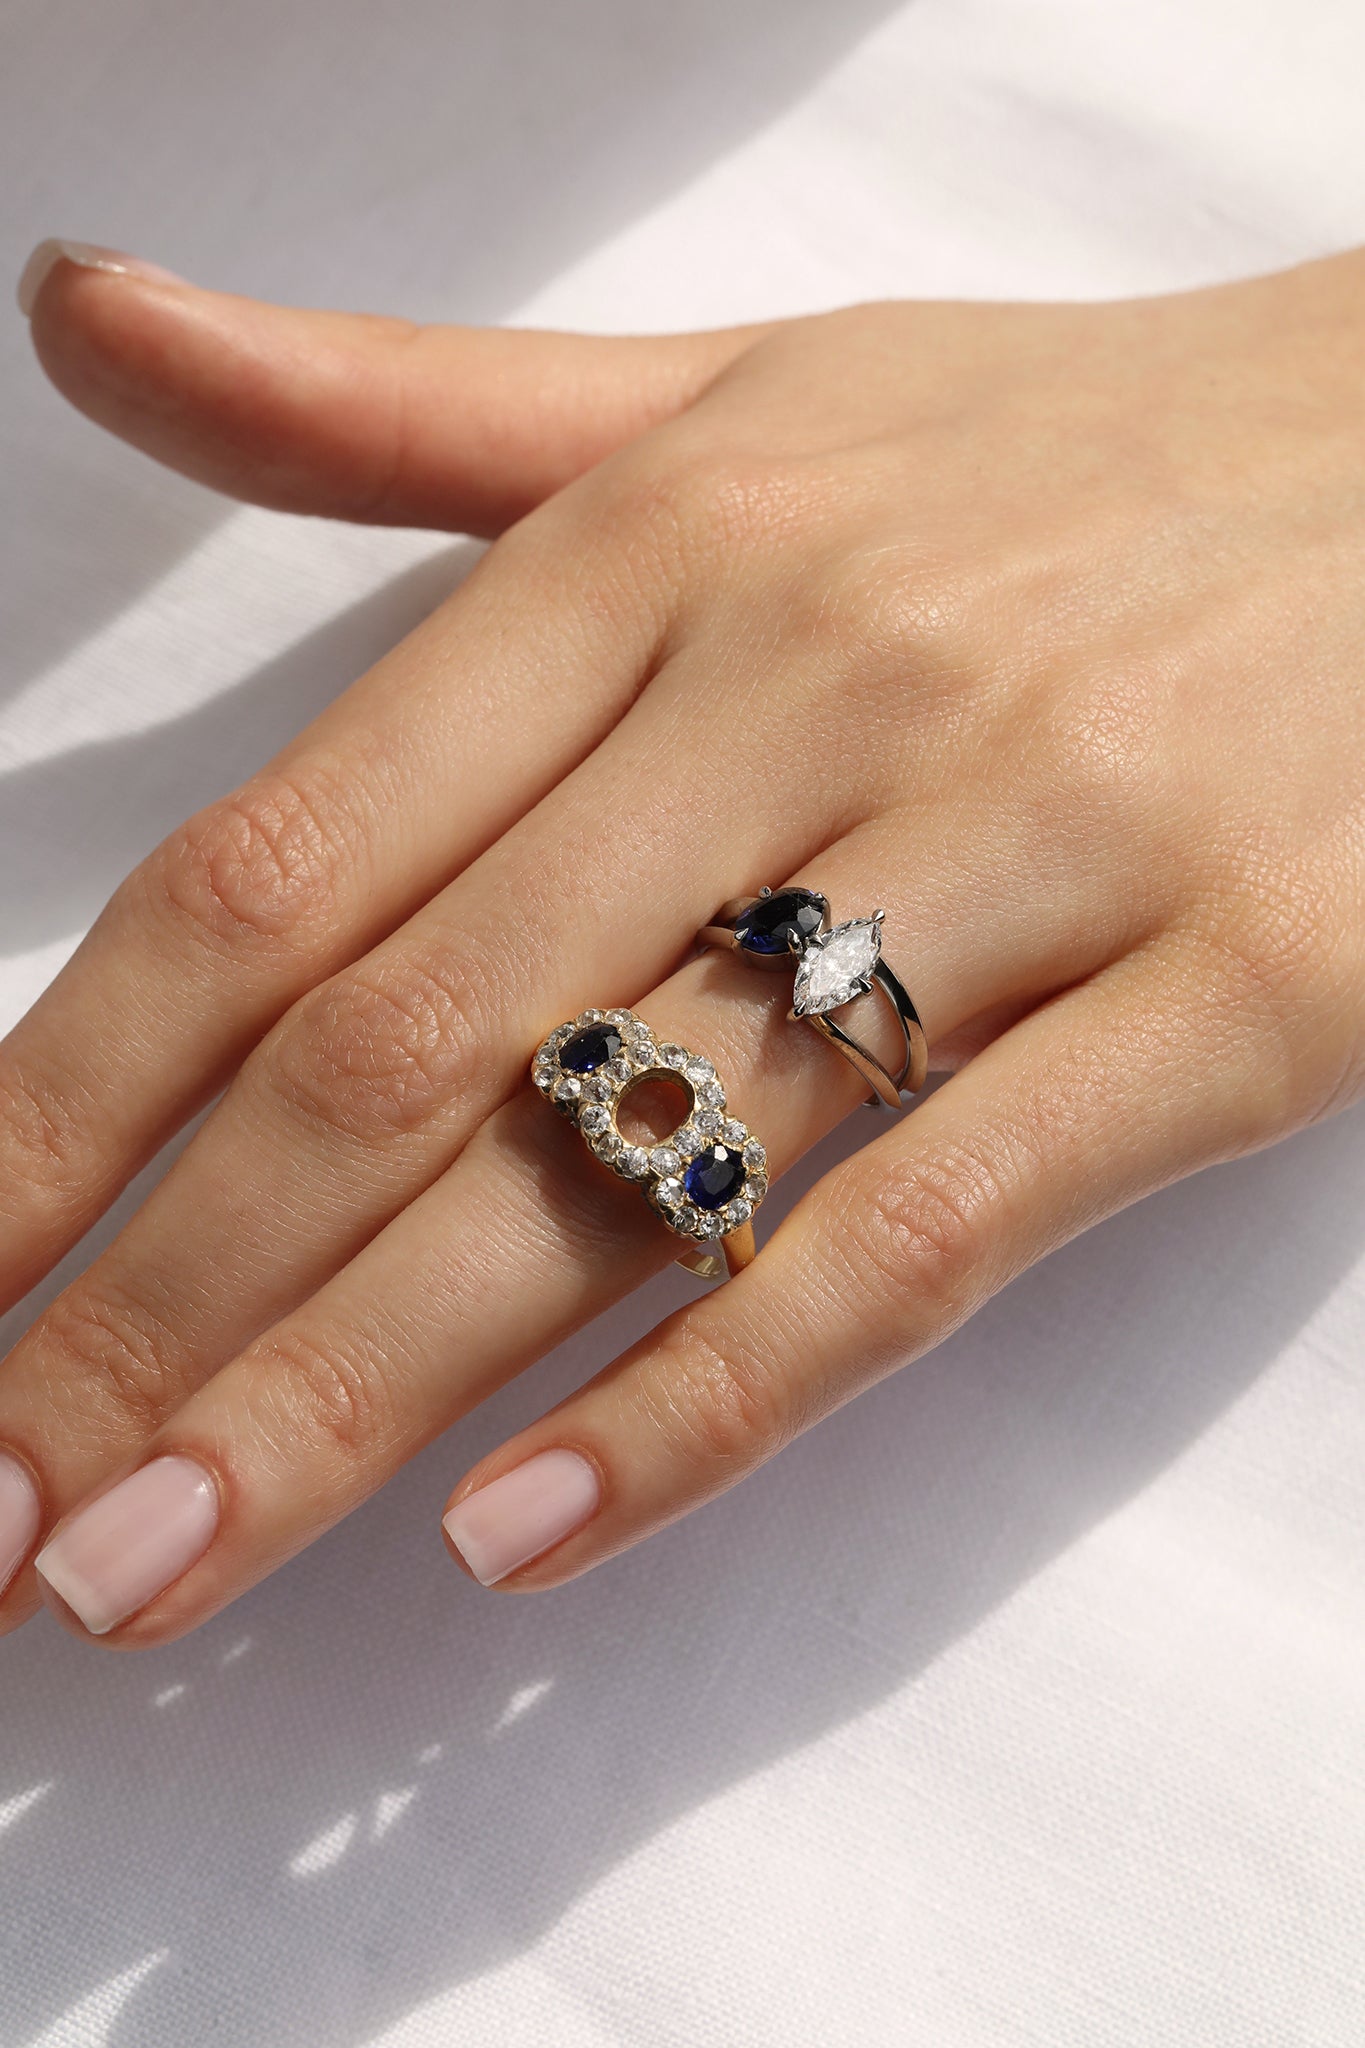 A remodelled sapphire engagement ring, handmade in England using a family heirloom sapphire ring. The style is a Toi et Moi engagement ring made using the sapphire from the original ring with an additional diamond added to make the finished Toi et Moi engagement ring